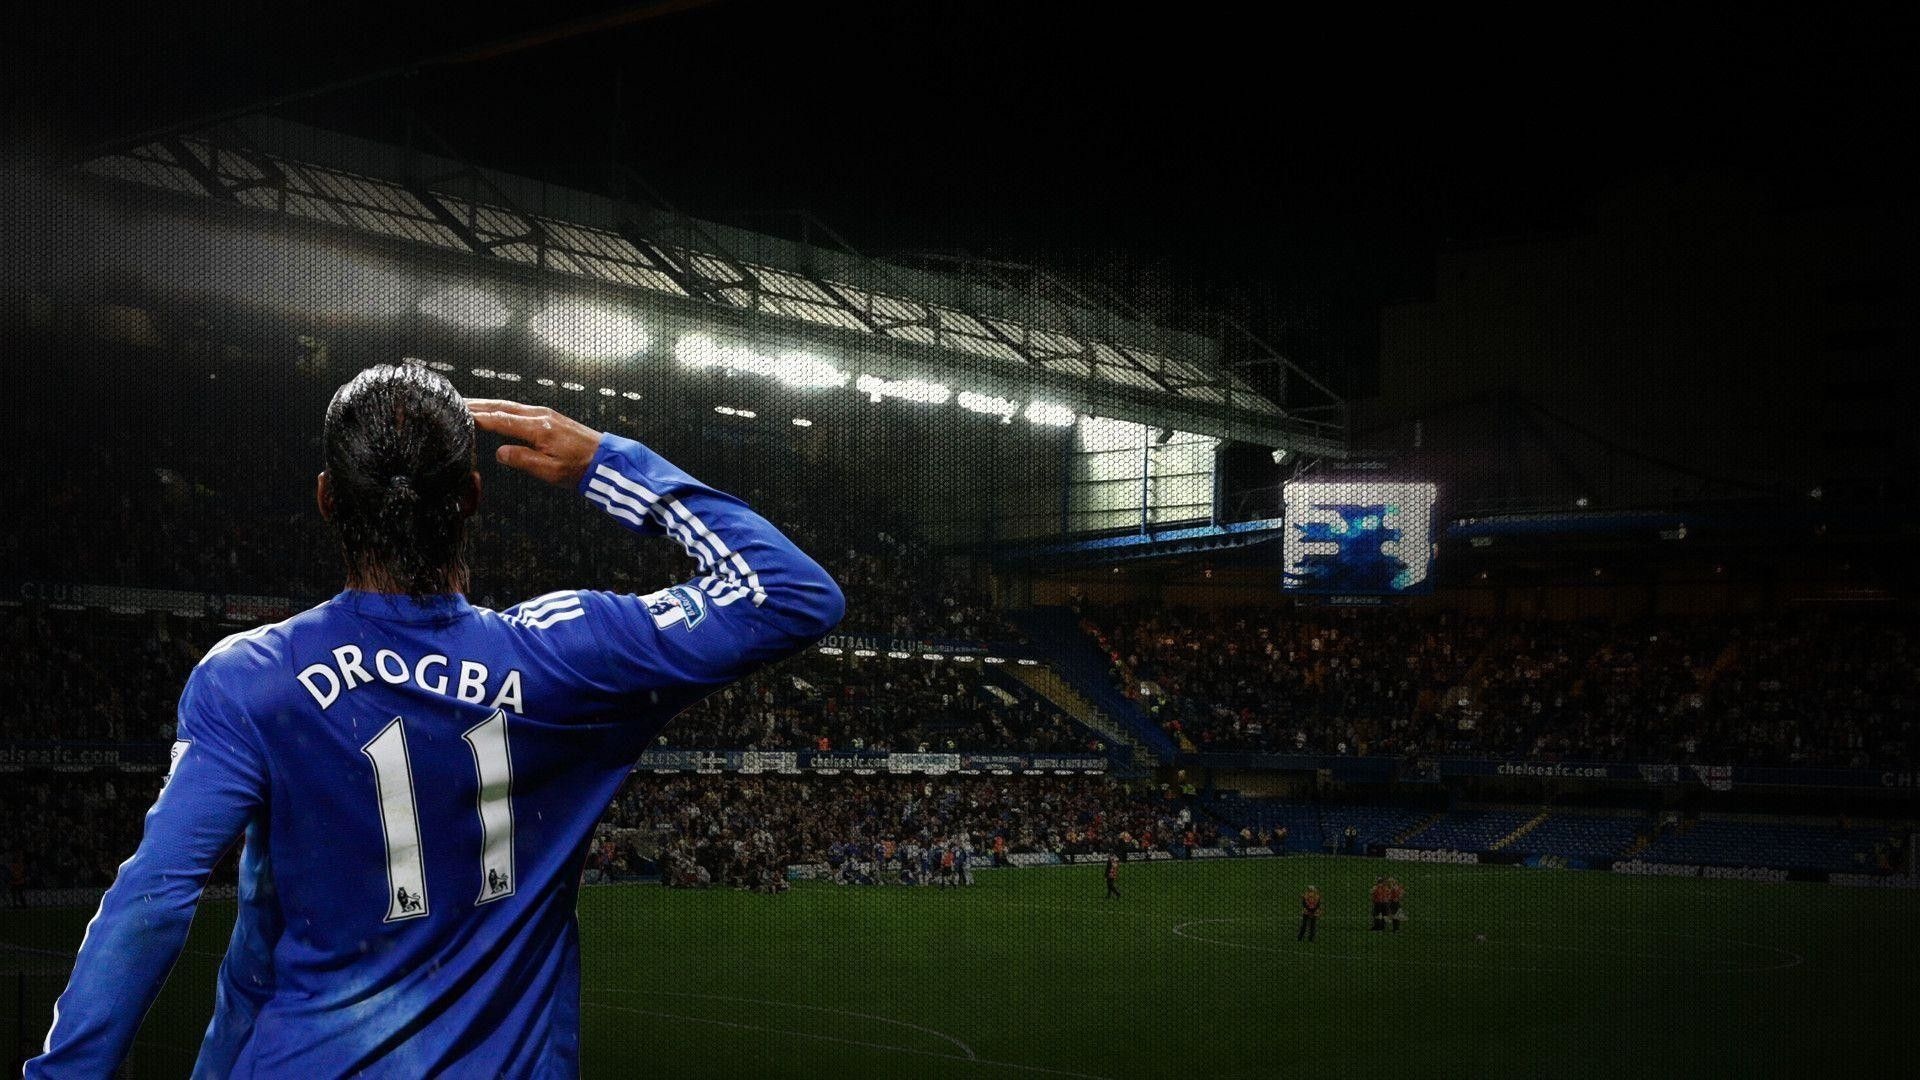 Drogba: A global football player, The world-famous Chelsea club. 1920x1080 Full HD Background.